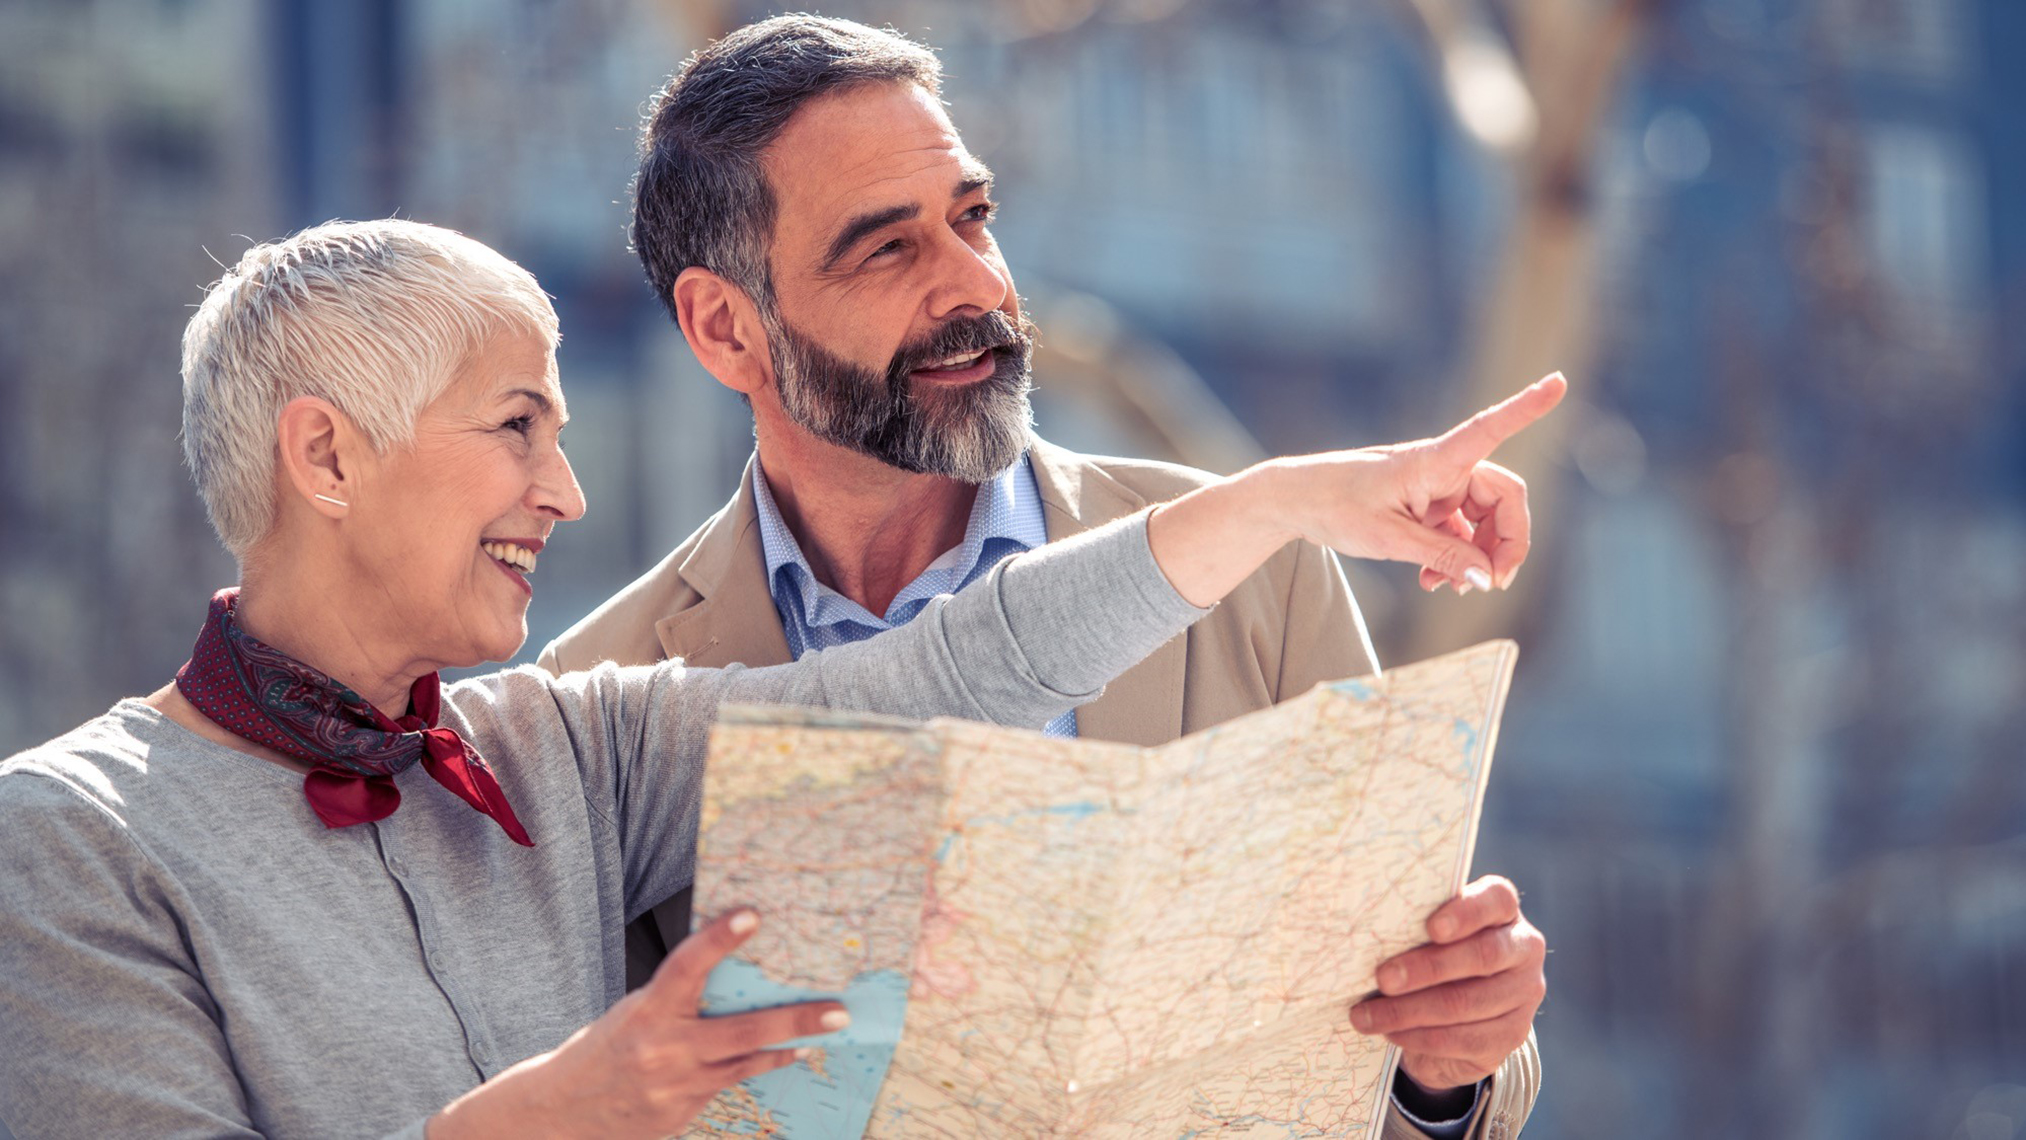 AARP 2022 Travel Trends Domestic Travel Is Bouncing Back